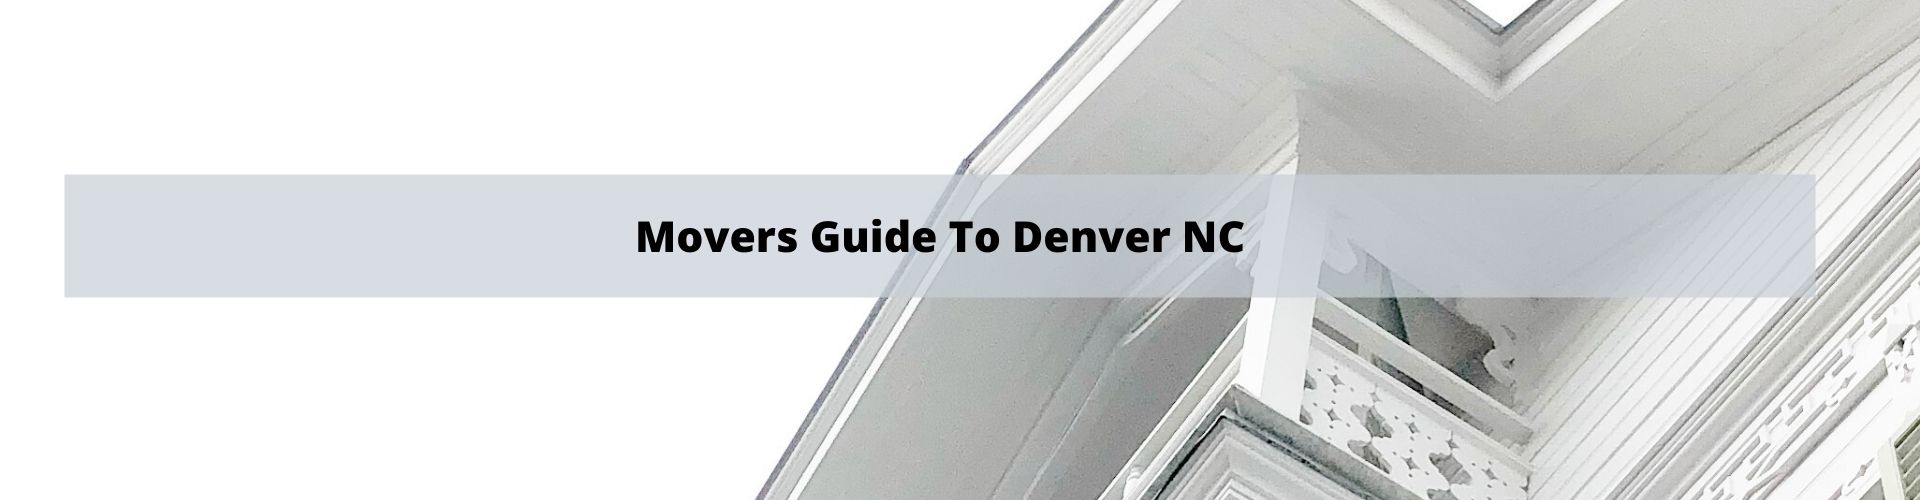 Mover's Guide to Denver NC